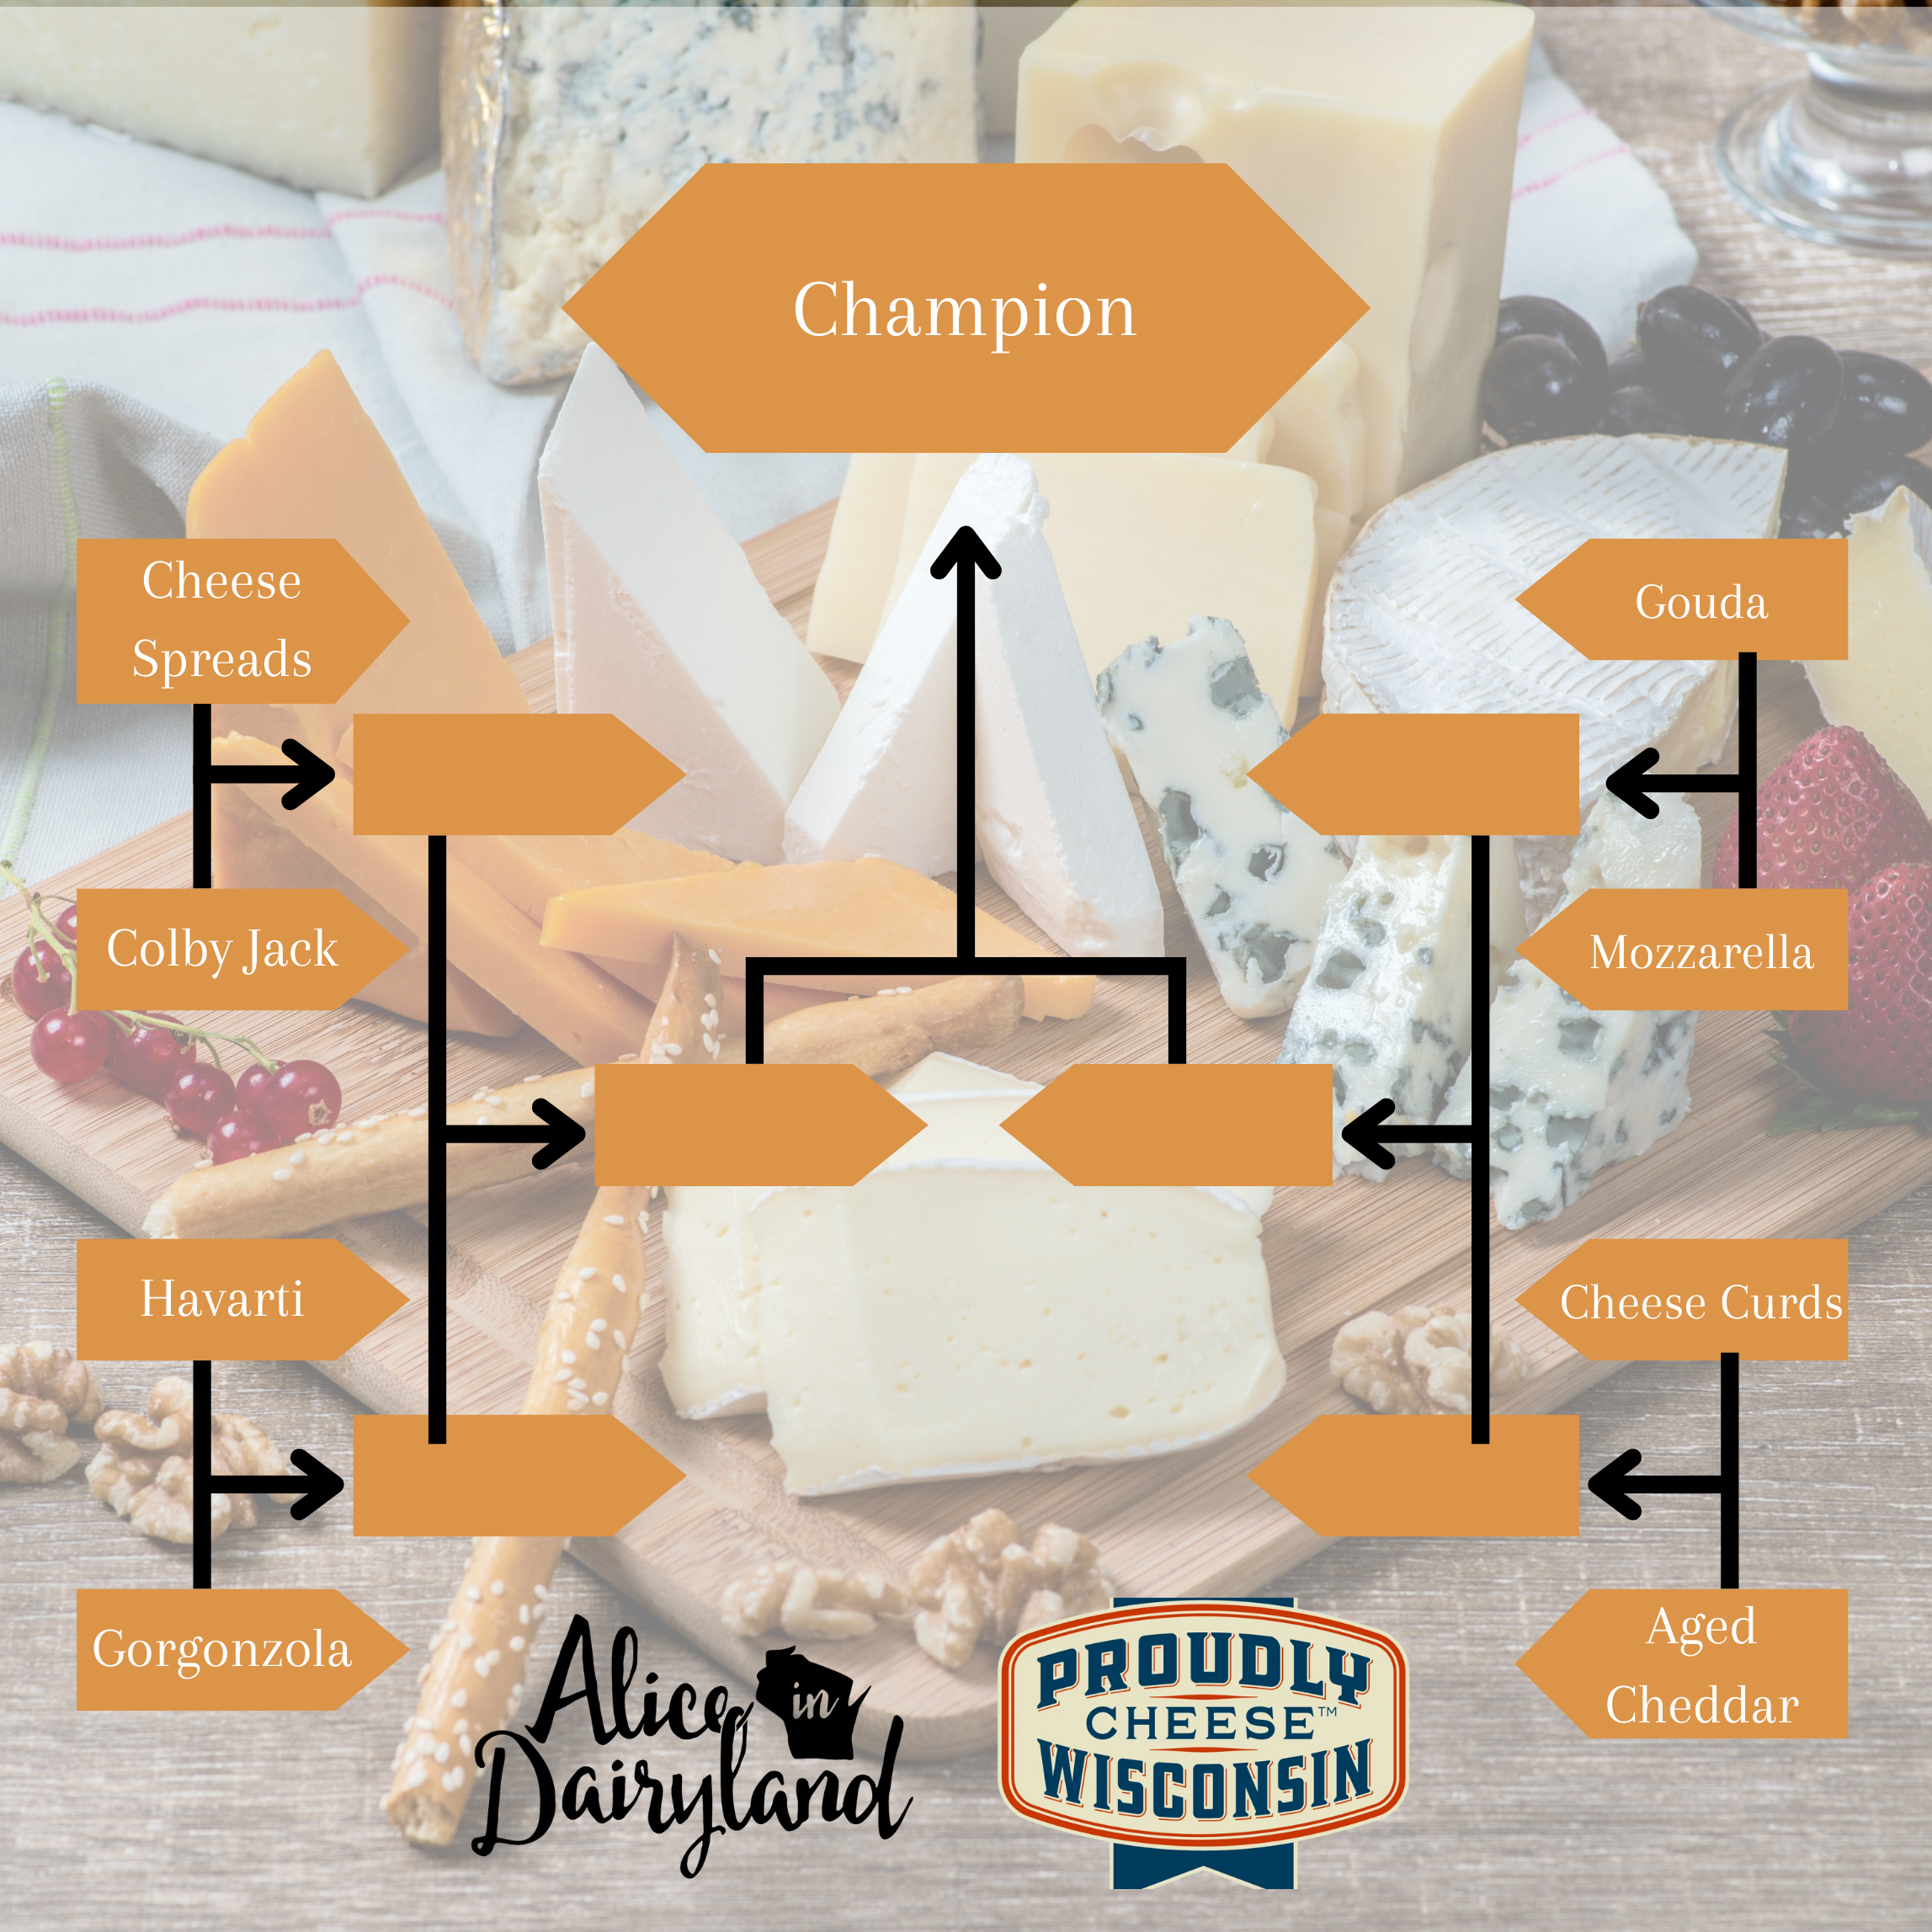 Get "Cheesy" During March Madness